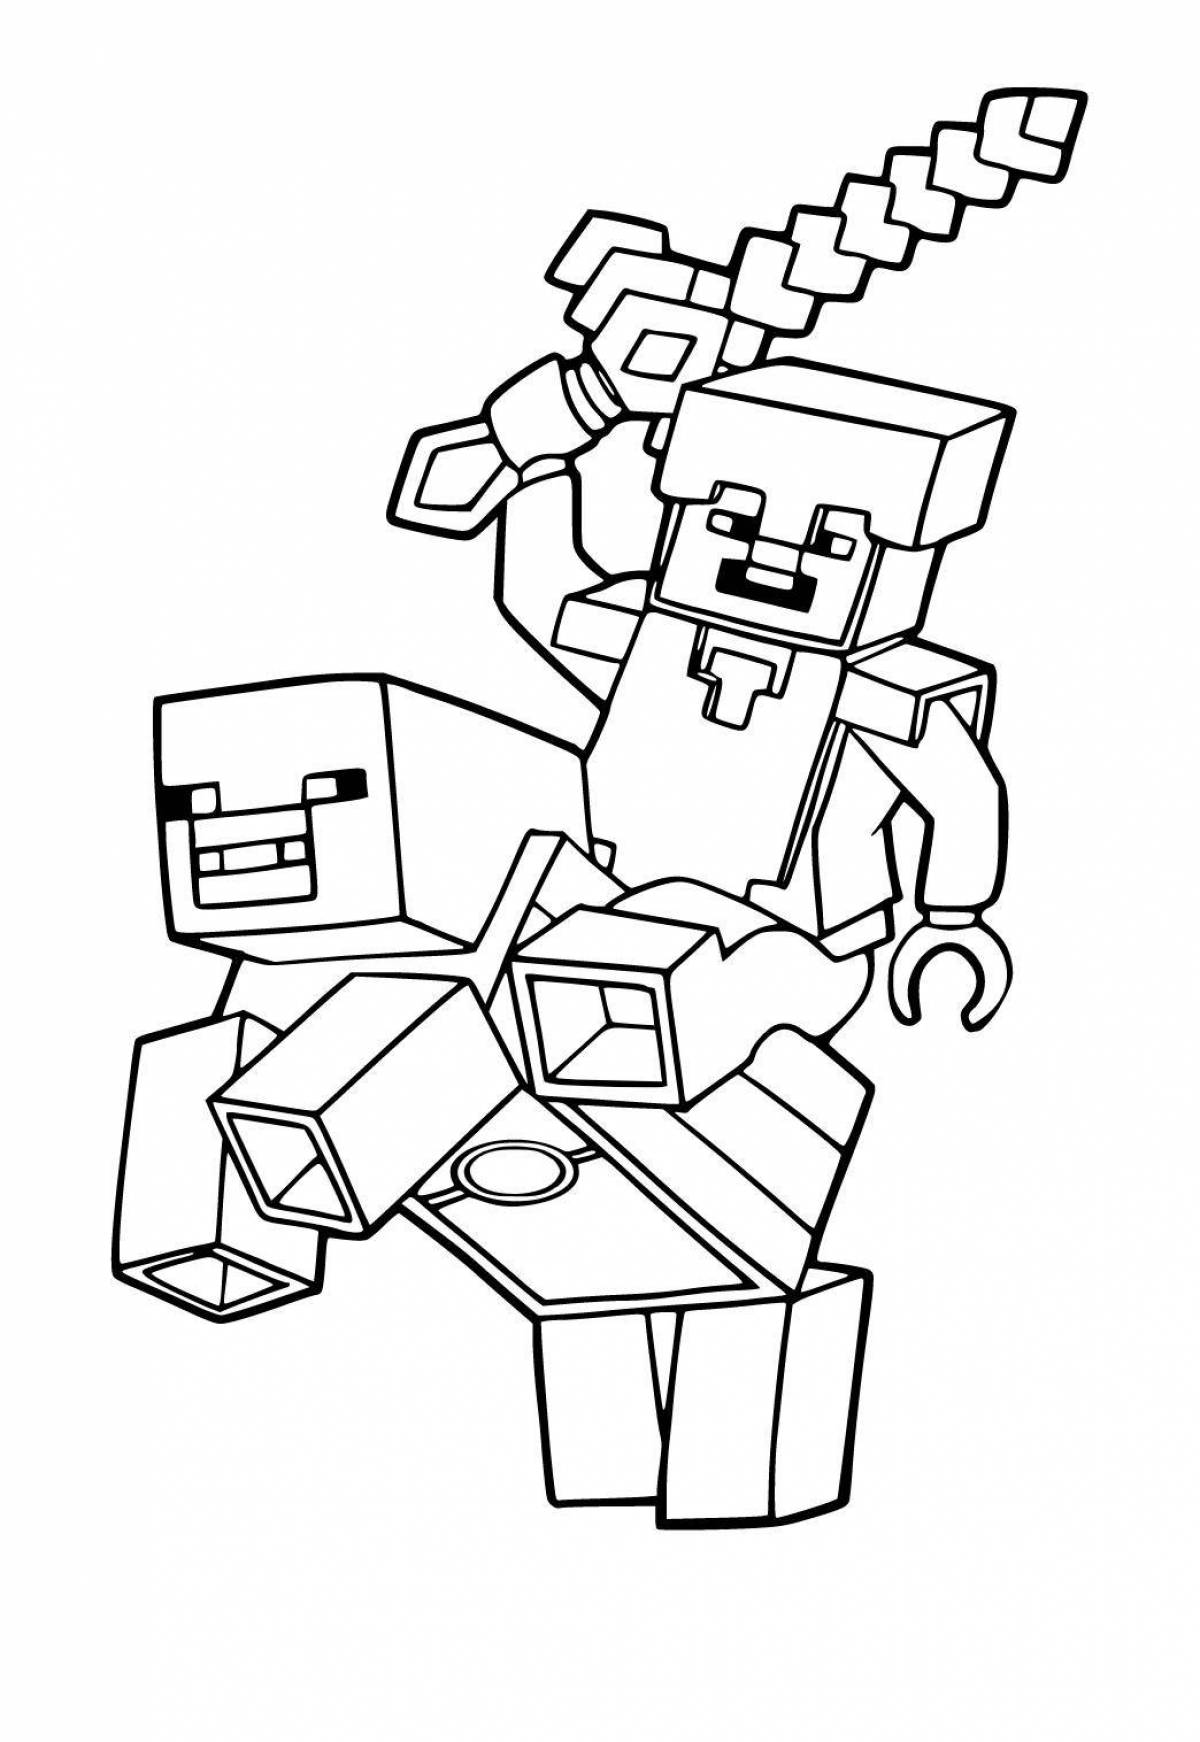 Glorious minecraft nubik coloring page